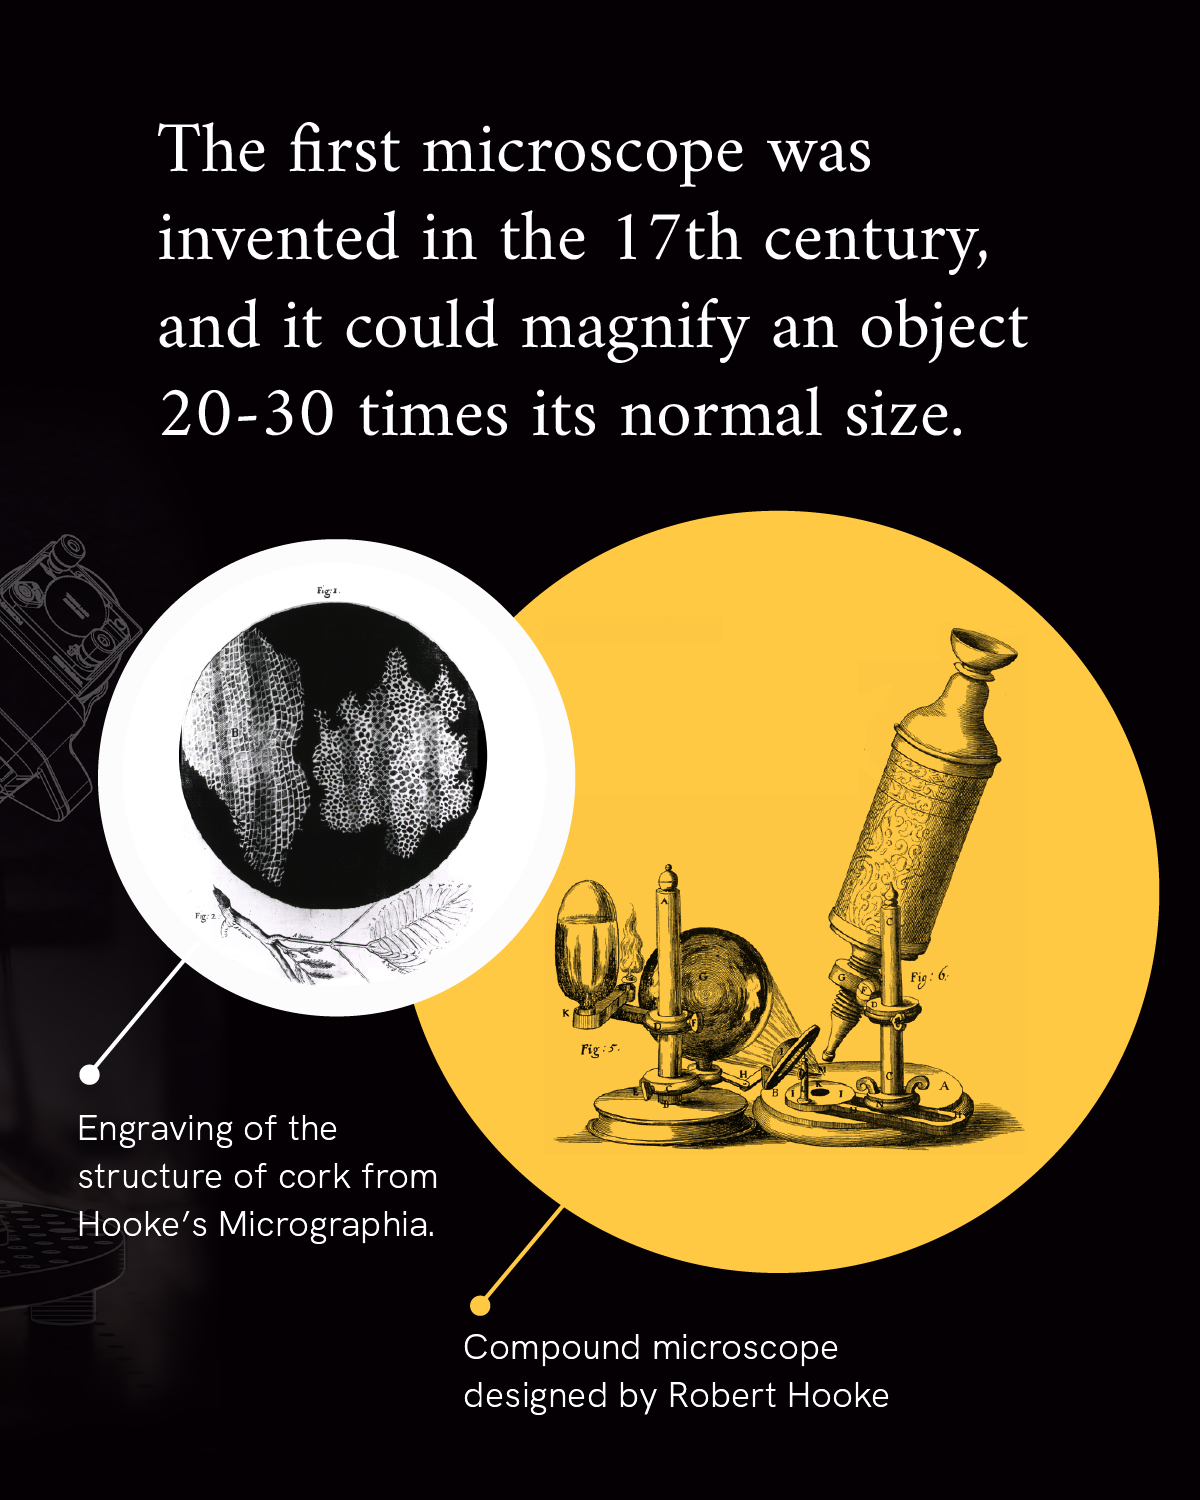 Infographic reads “The first microscope was invented in the 17th century, and it could magnify an object 20-30 times its normal size.” An illustration of an original microscope next to an illustration of the engraving from the microscope accompanies the text.